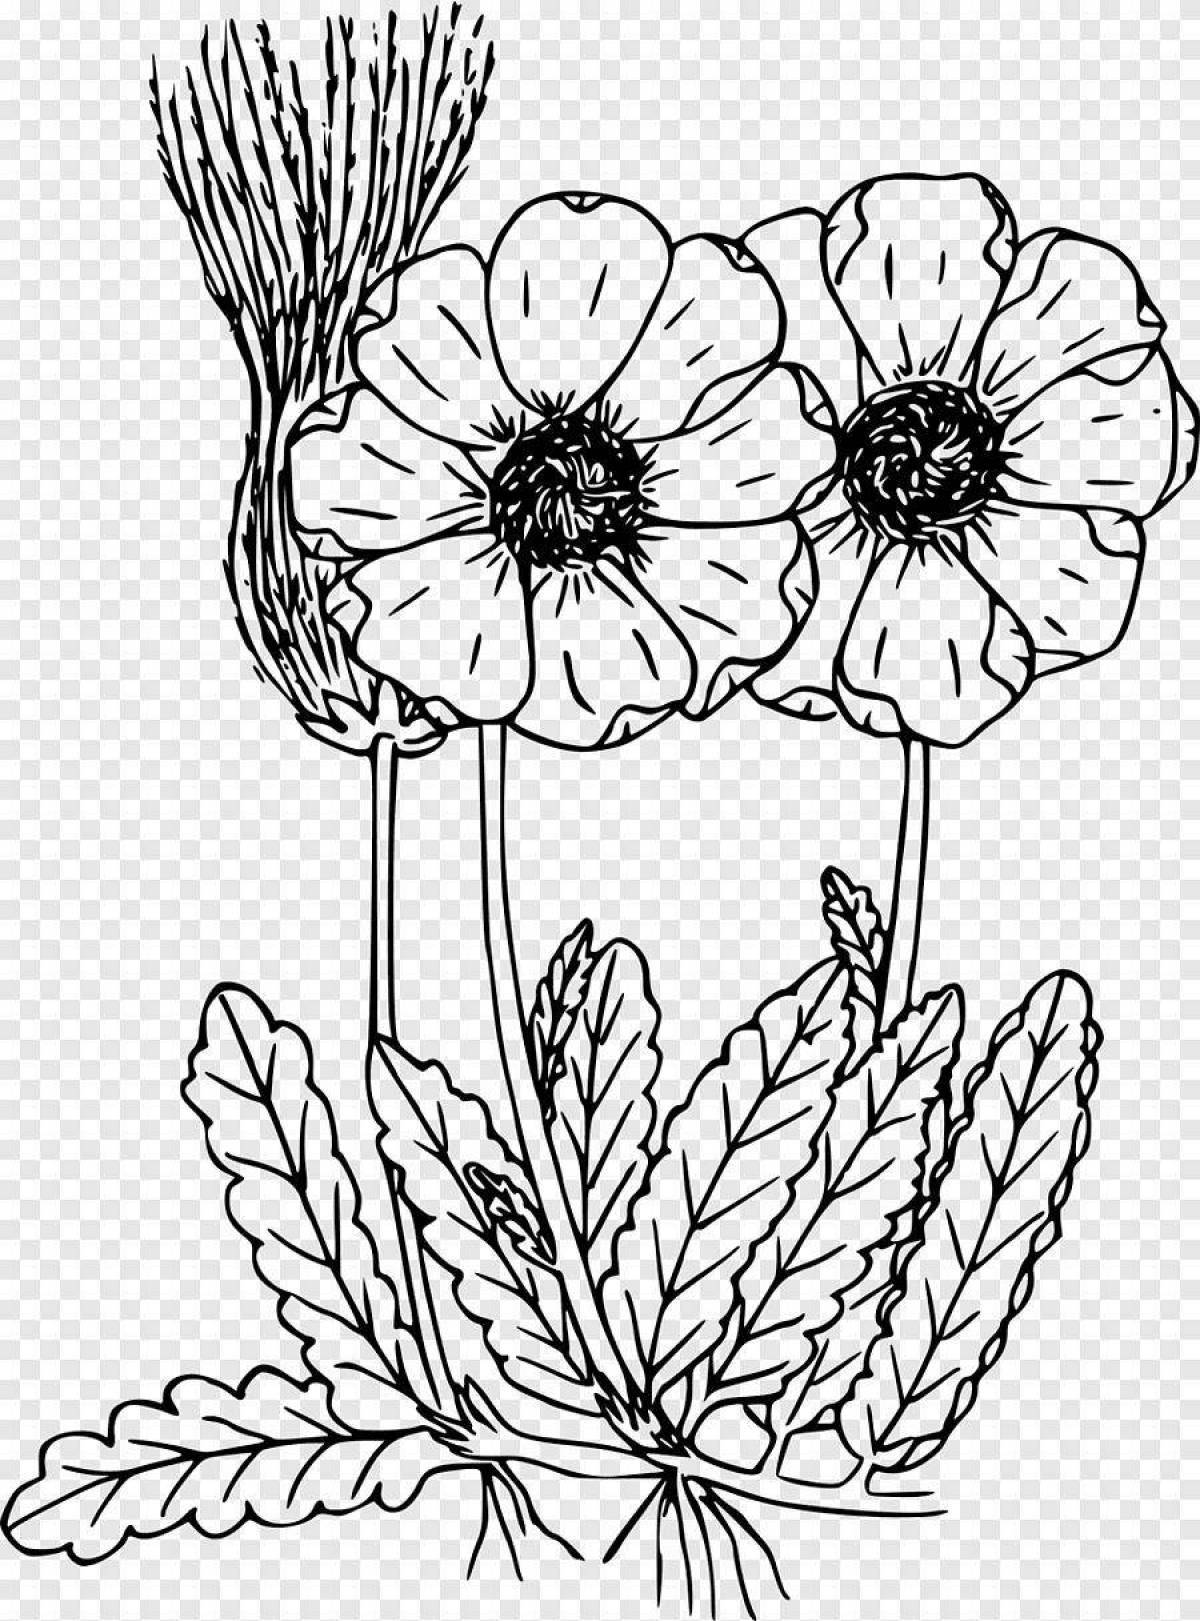 Coloring funny wildflowers for kids